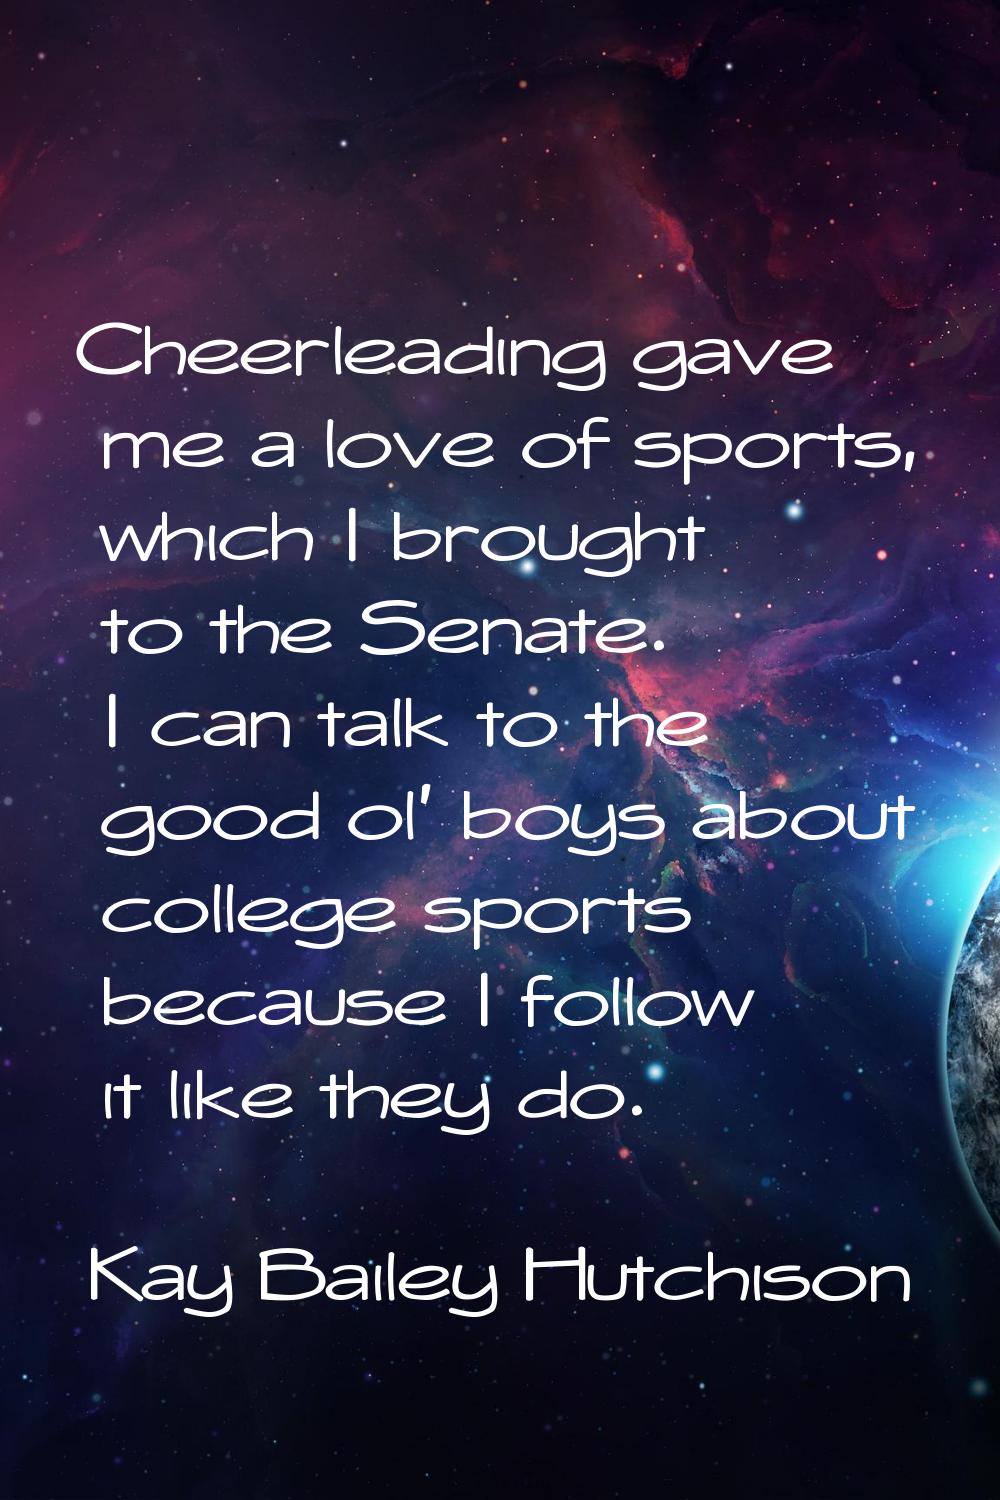 Cheerleading gave me a love of sports, which I brought to the Senate. I can talk to the good ol' bo